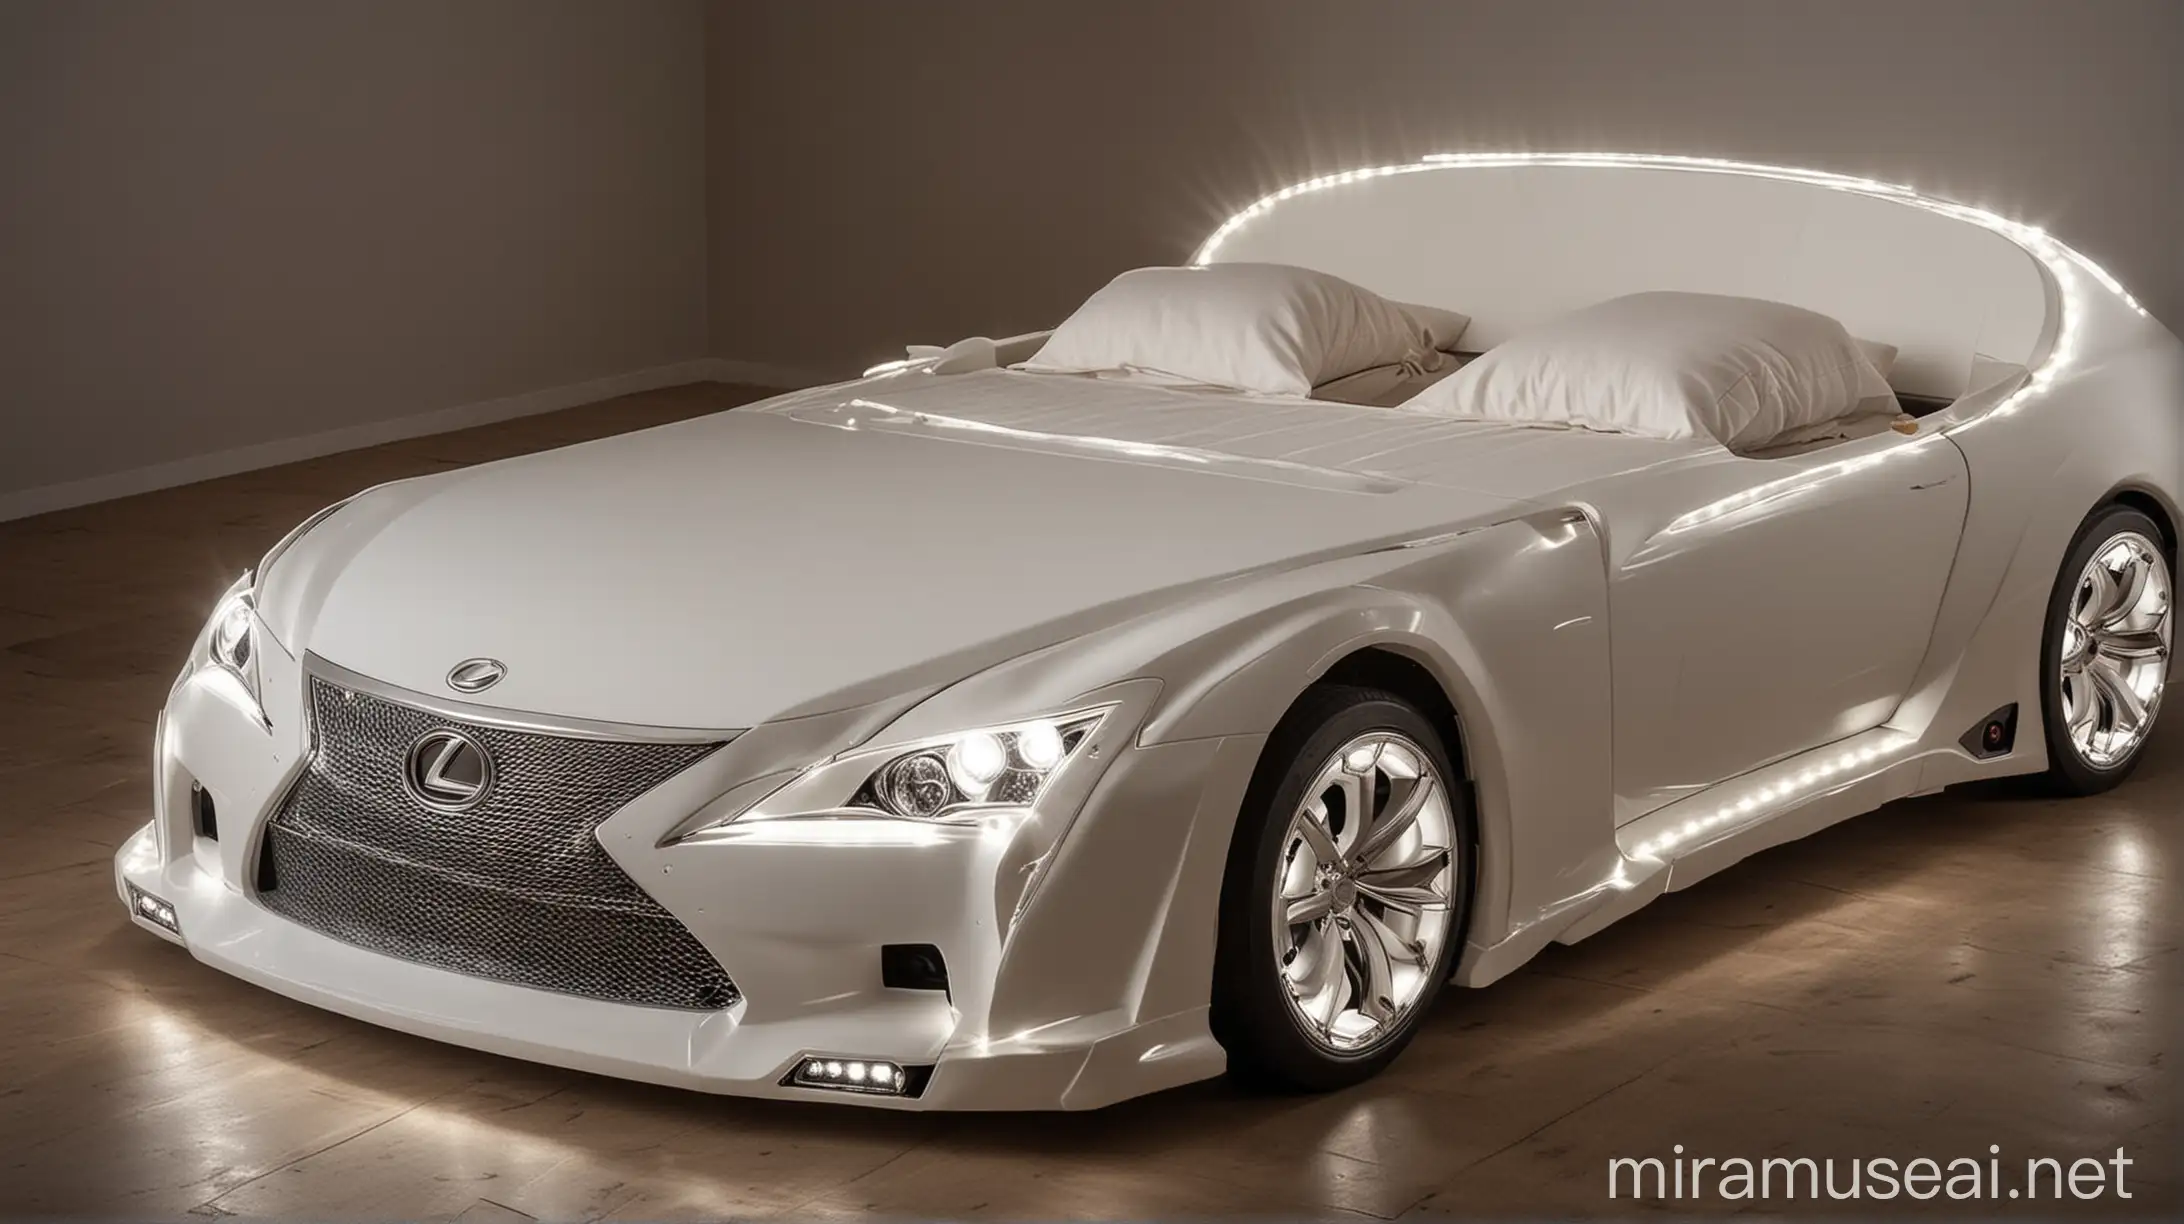 Double bed in the shape of a Lexus car with headlights on